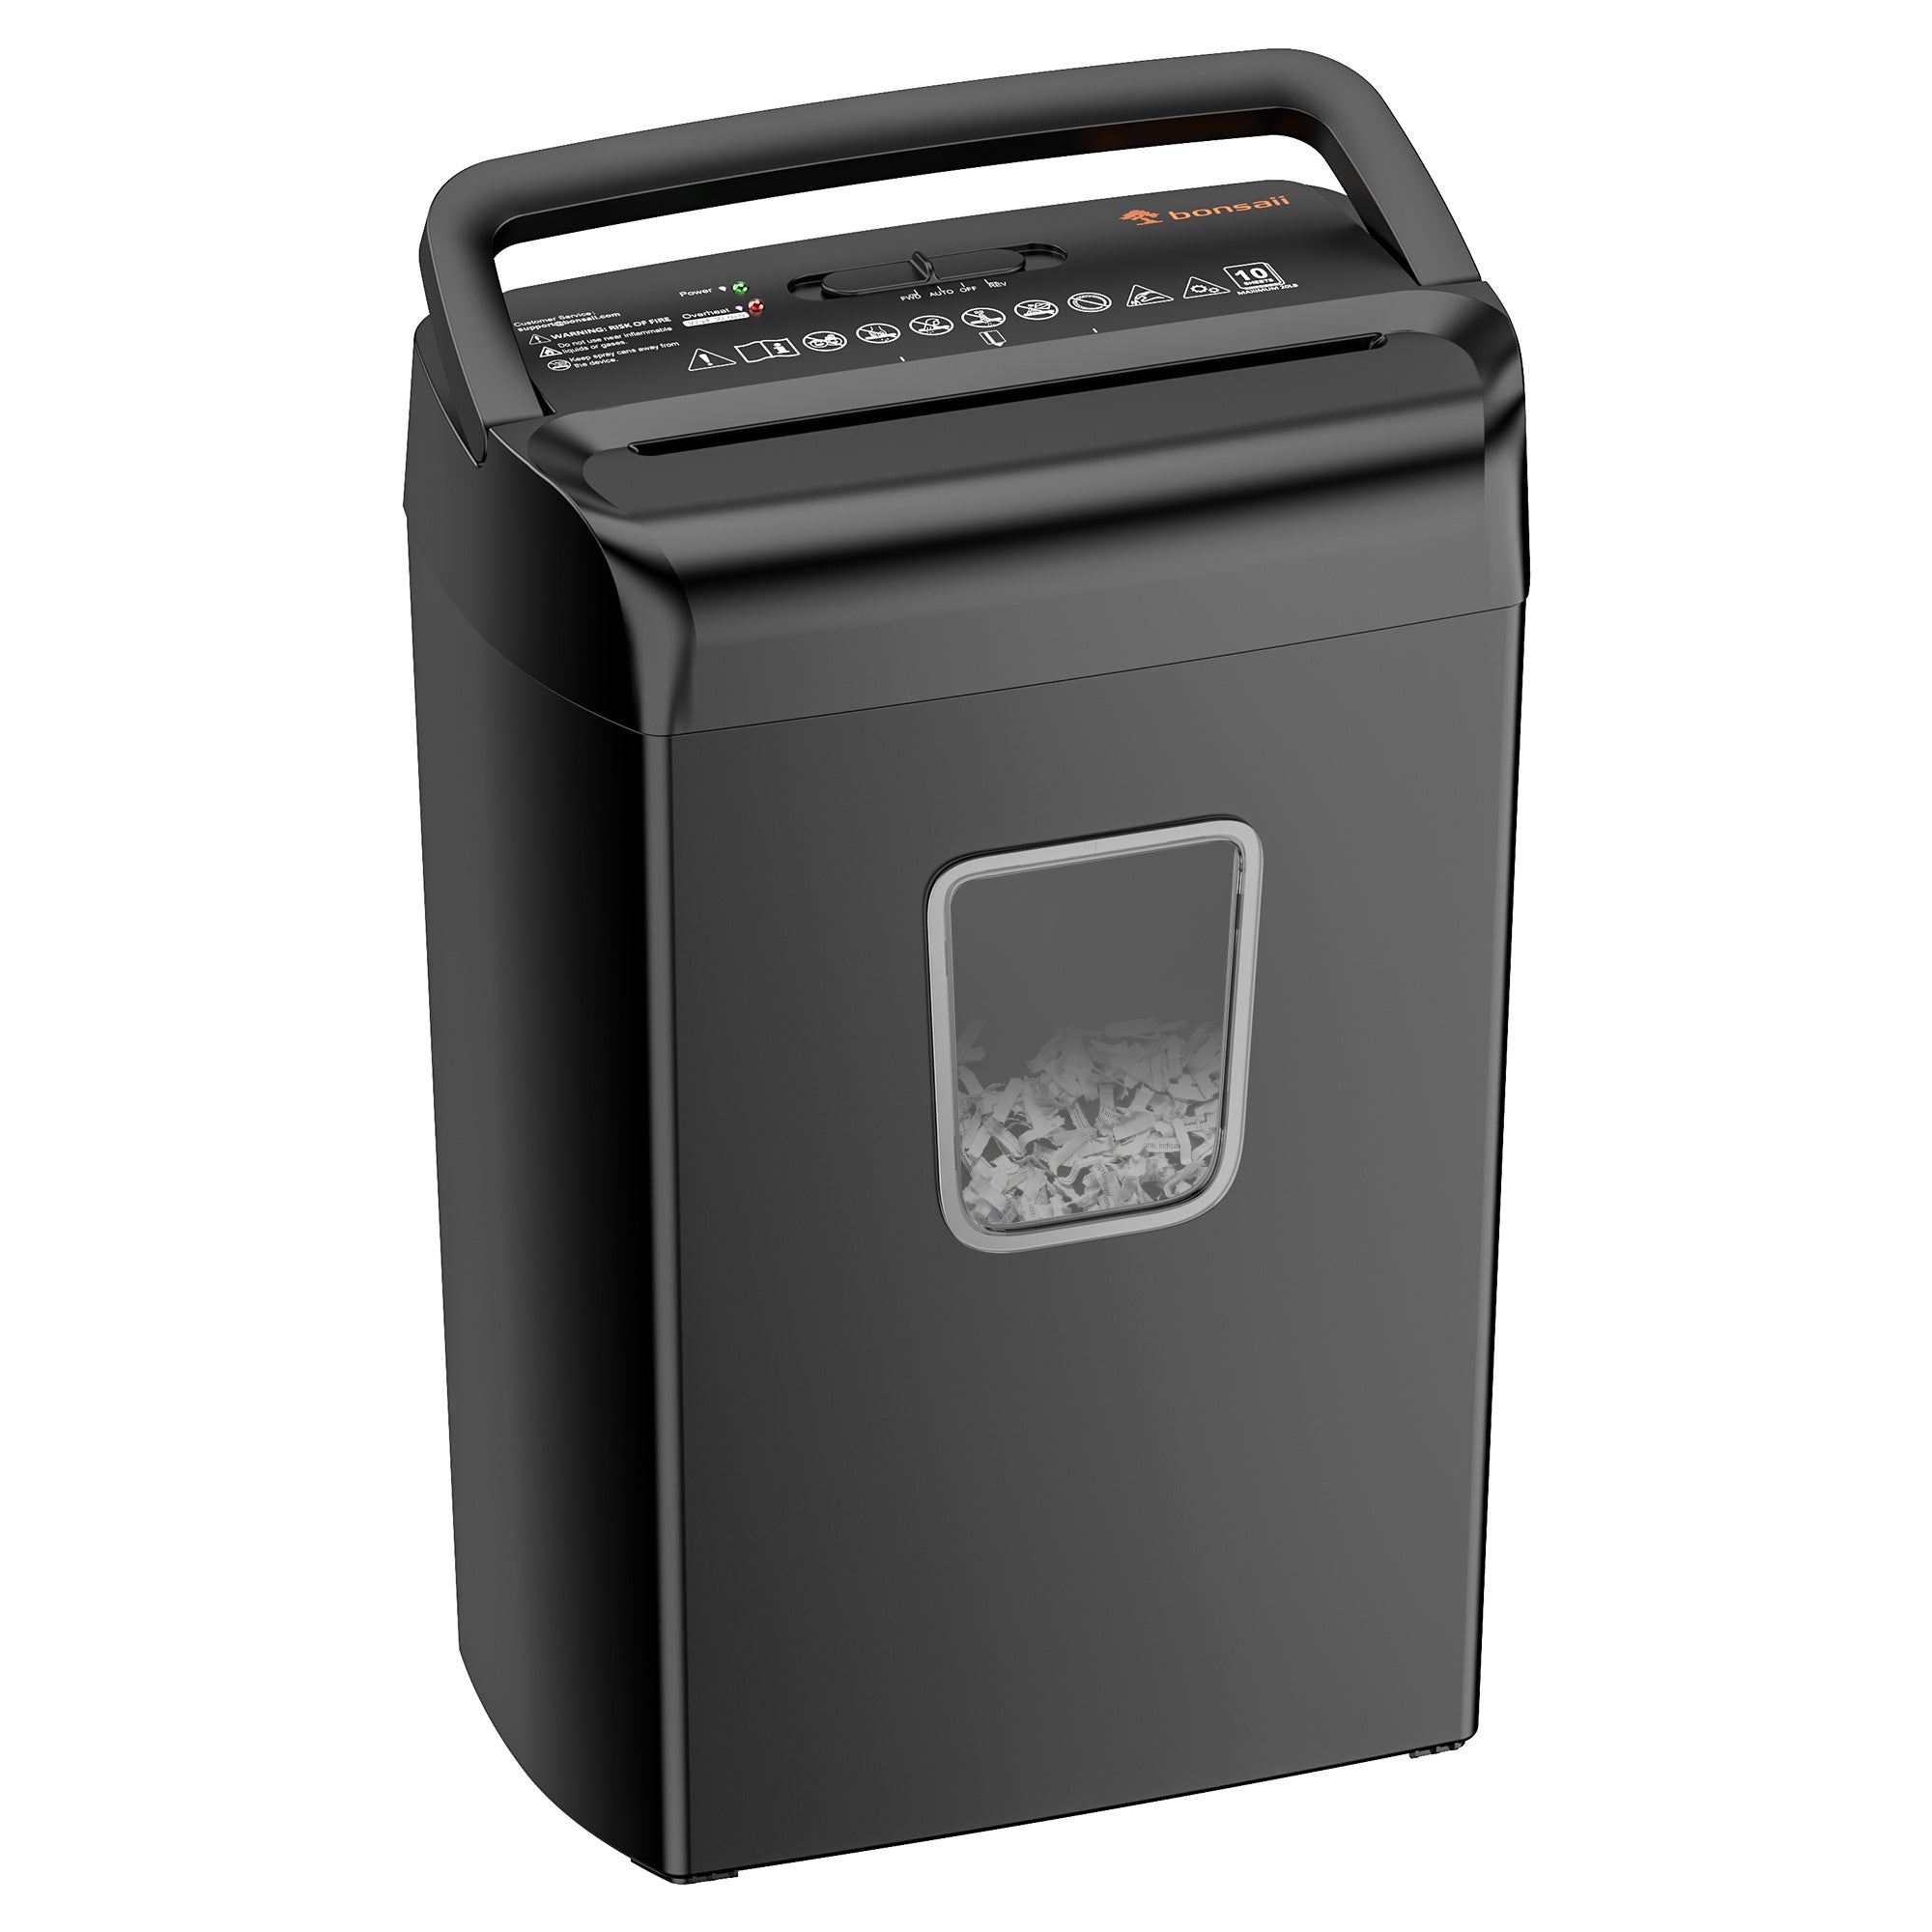 Bonsaii 10-Sheet Cross Cut Paper Shredder for Home Office Use with 5.5-Gallon Wastebasket C279-A